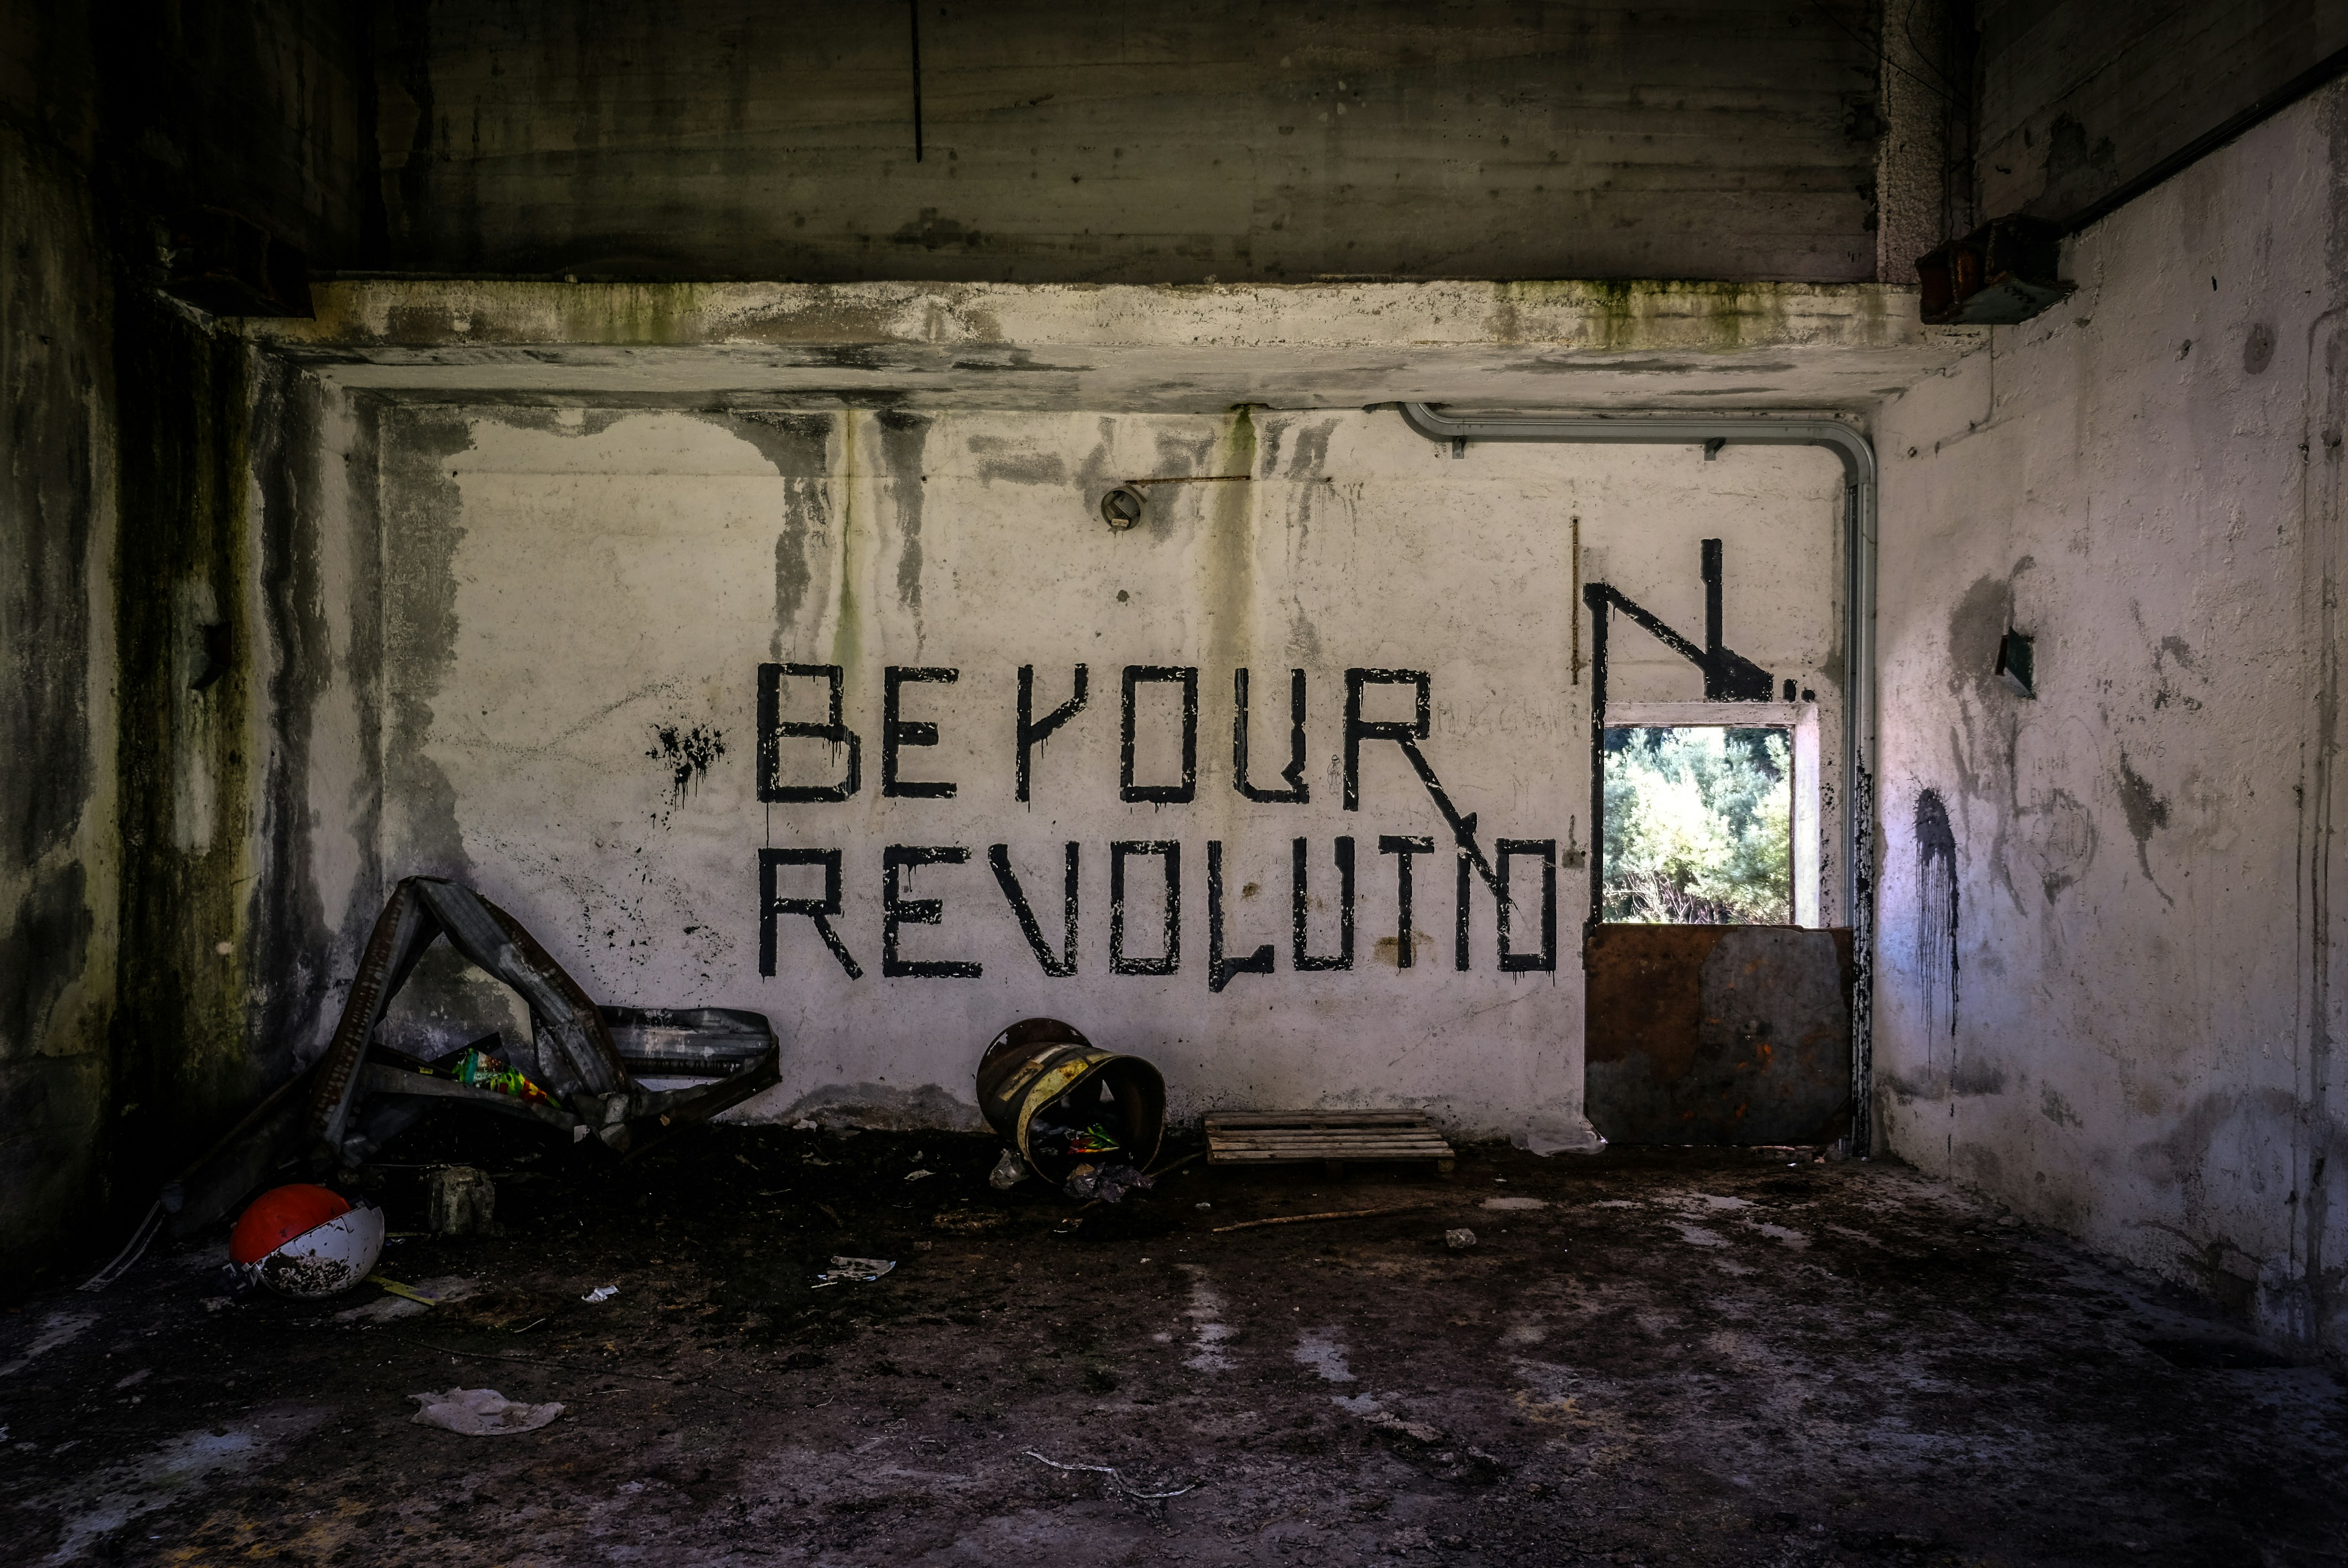 Be Your Revolution painted